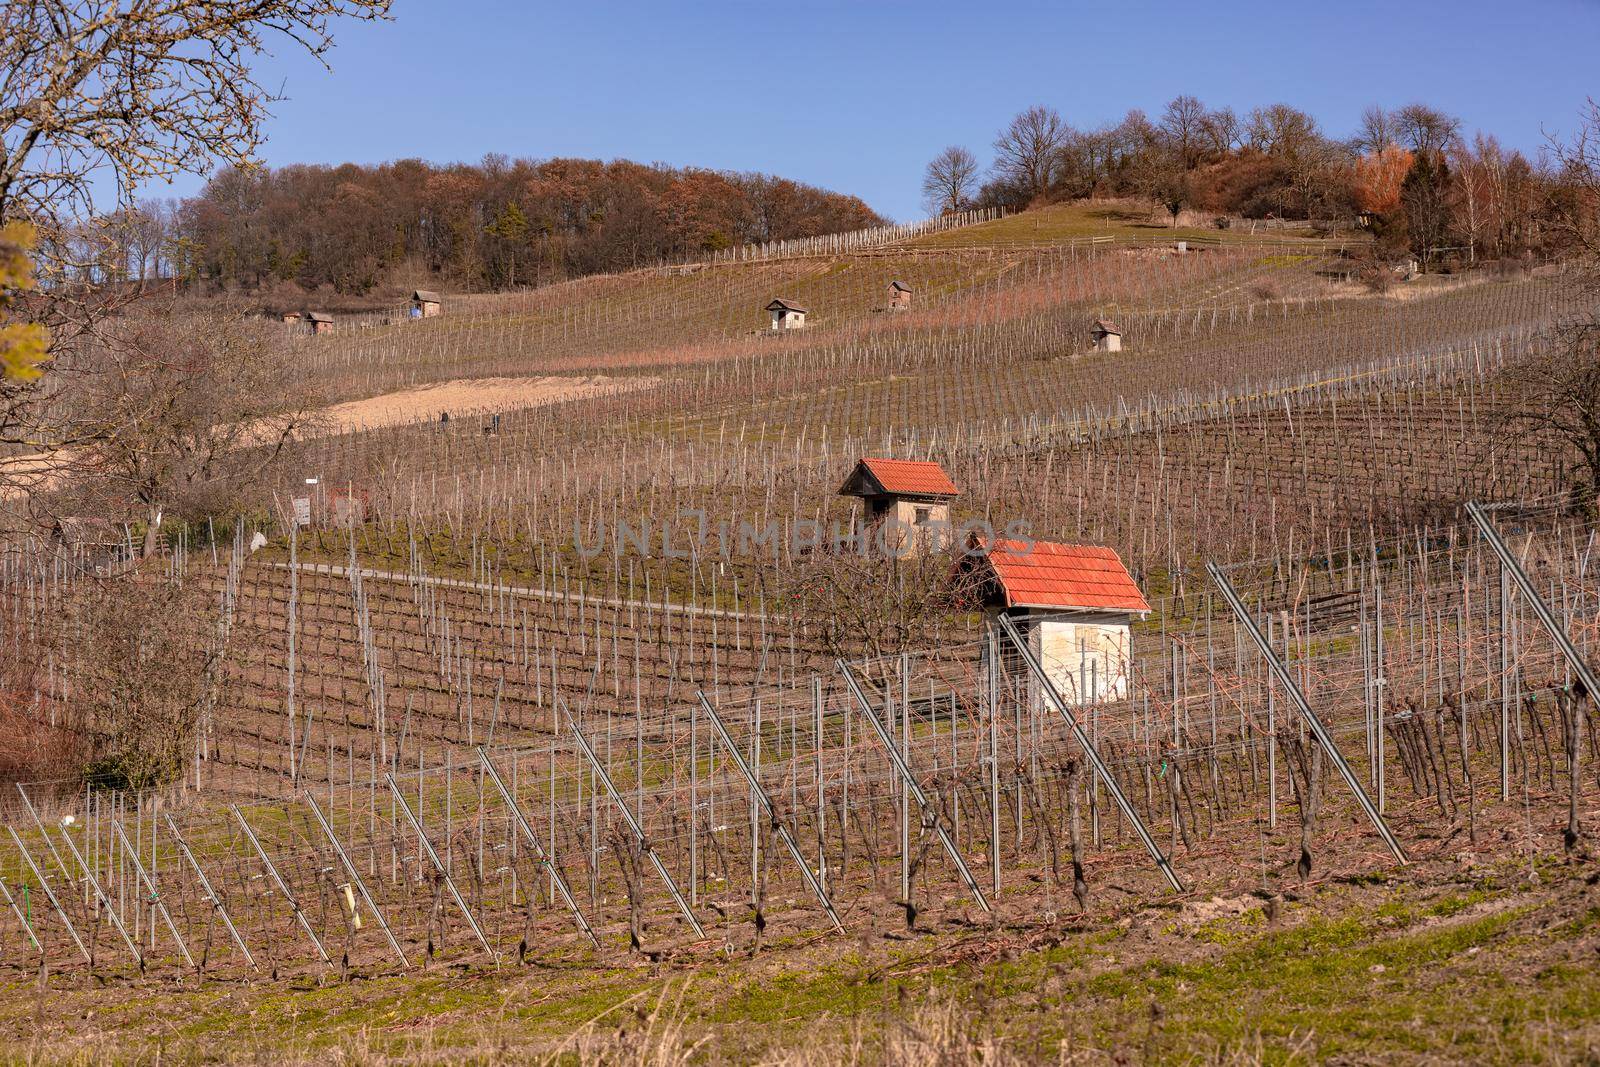 Hillside location with houses in the cultivated landscape of viticulture in the sunlight